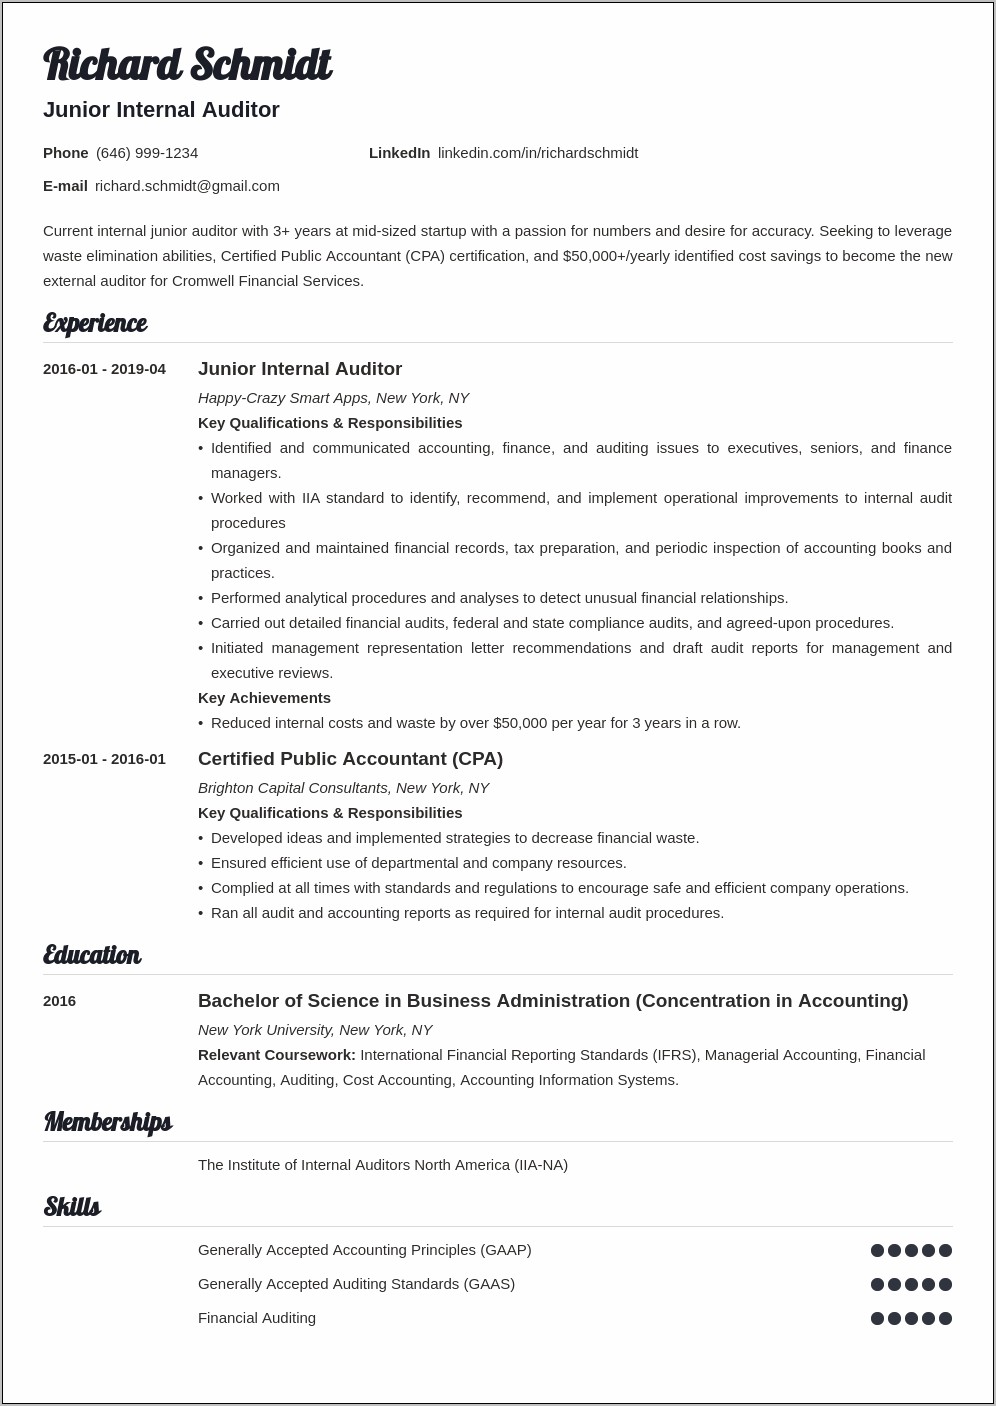 Resume Summary For A Audit Appeals Specialist